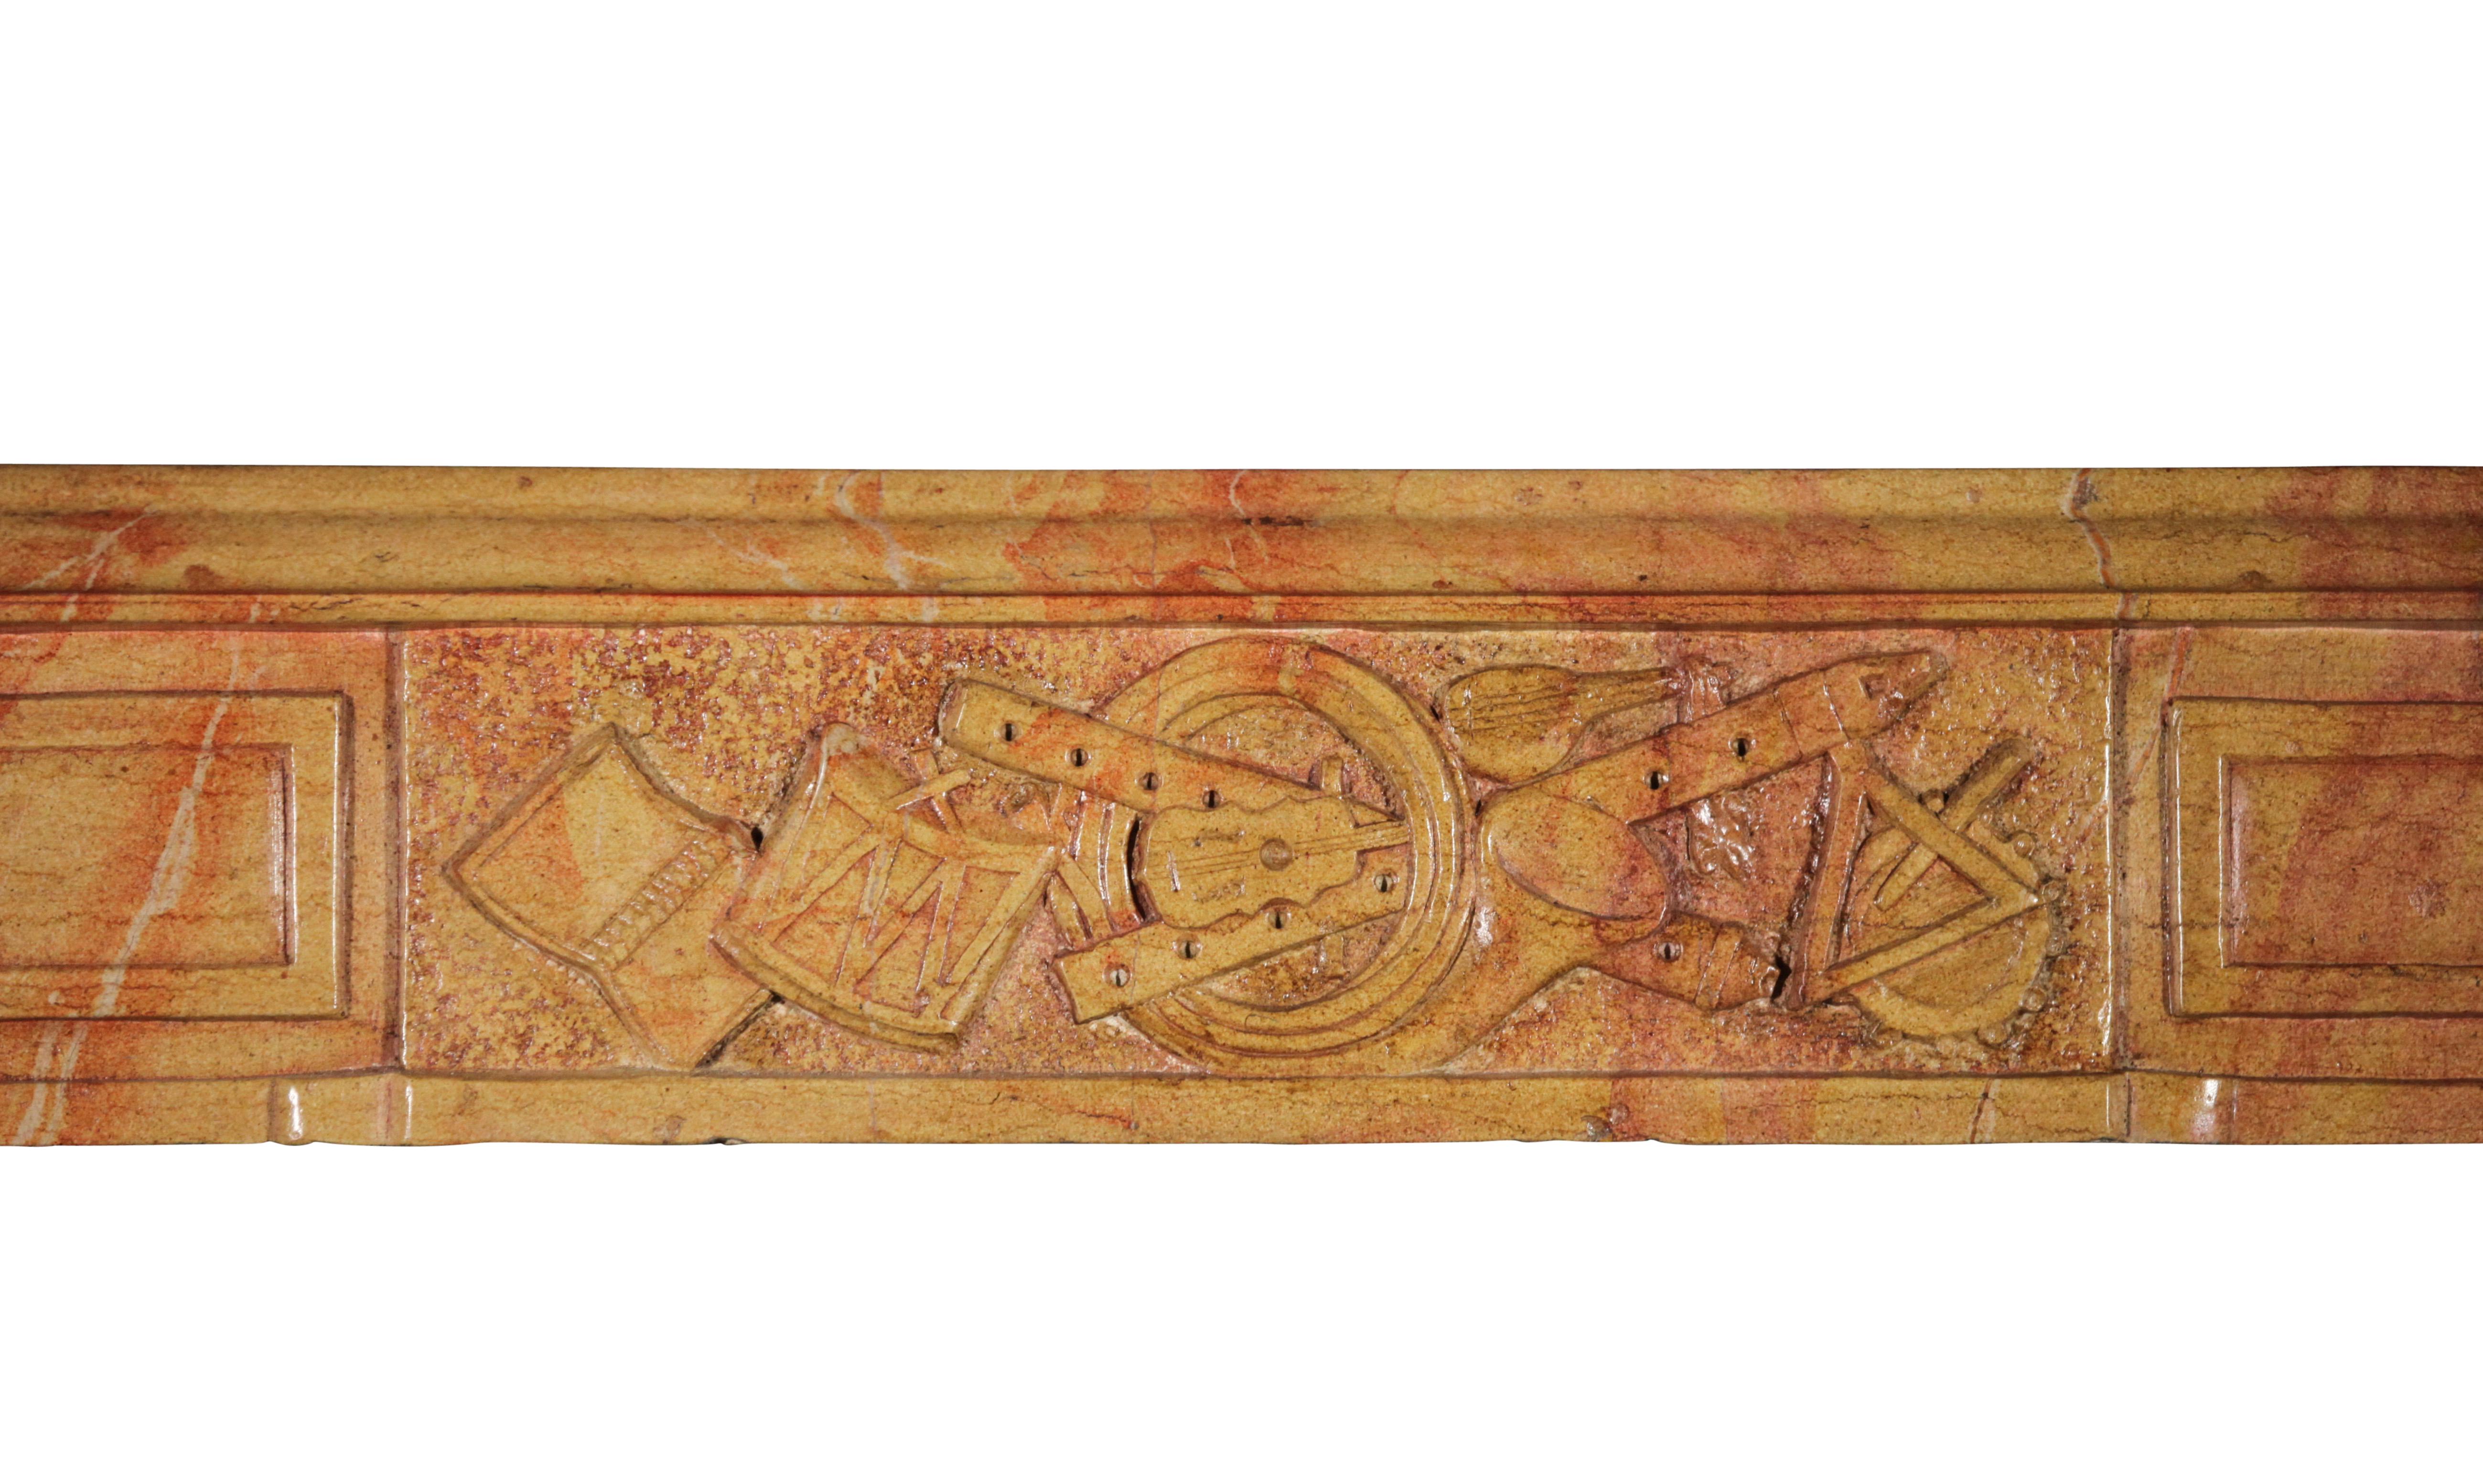 This fine European antique fireplace mantel is from the burgundy region near the Corton village. The bicolor of this marble hard stone is typical that village in the middle of the vineyards. The details on the front are showing music instruments.